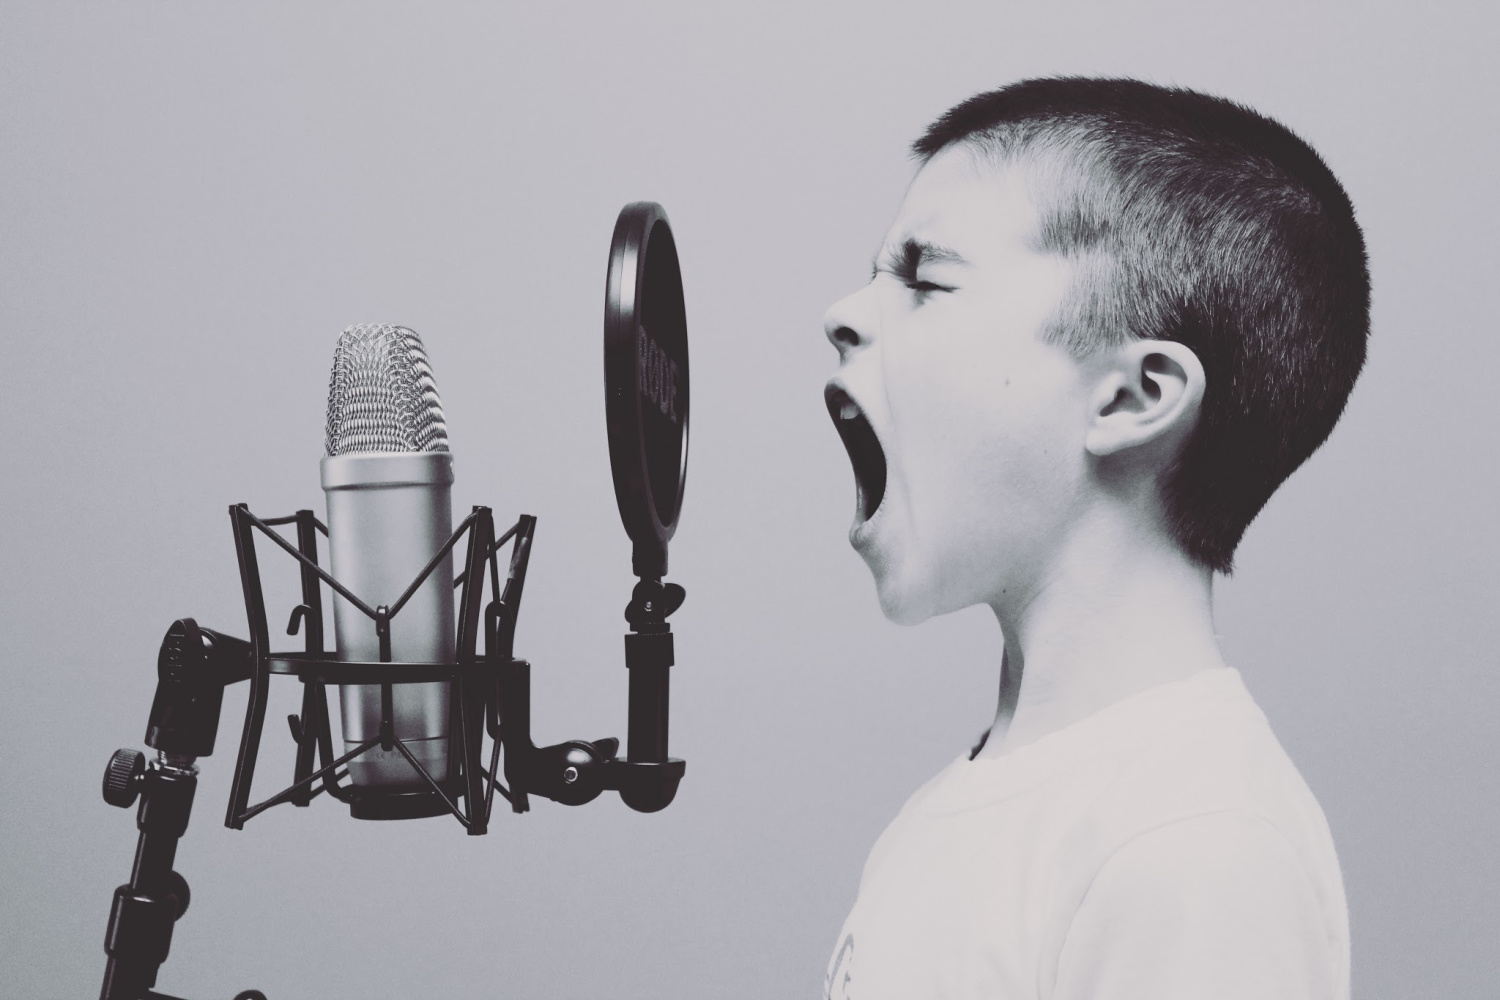 child screaming into a microphone